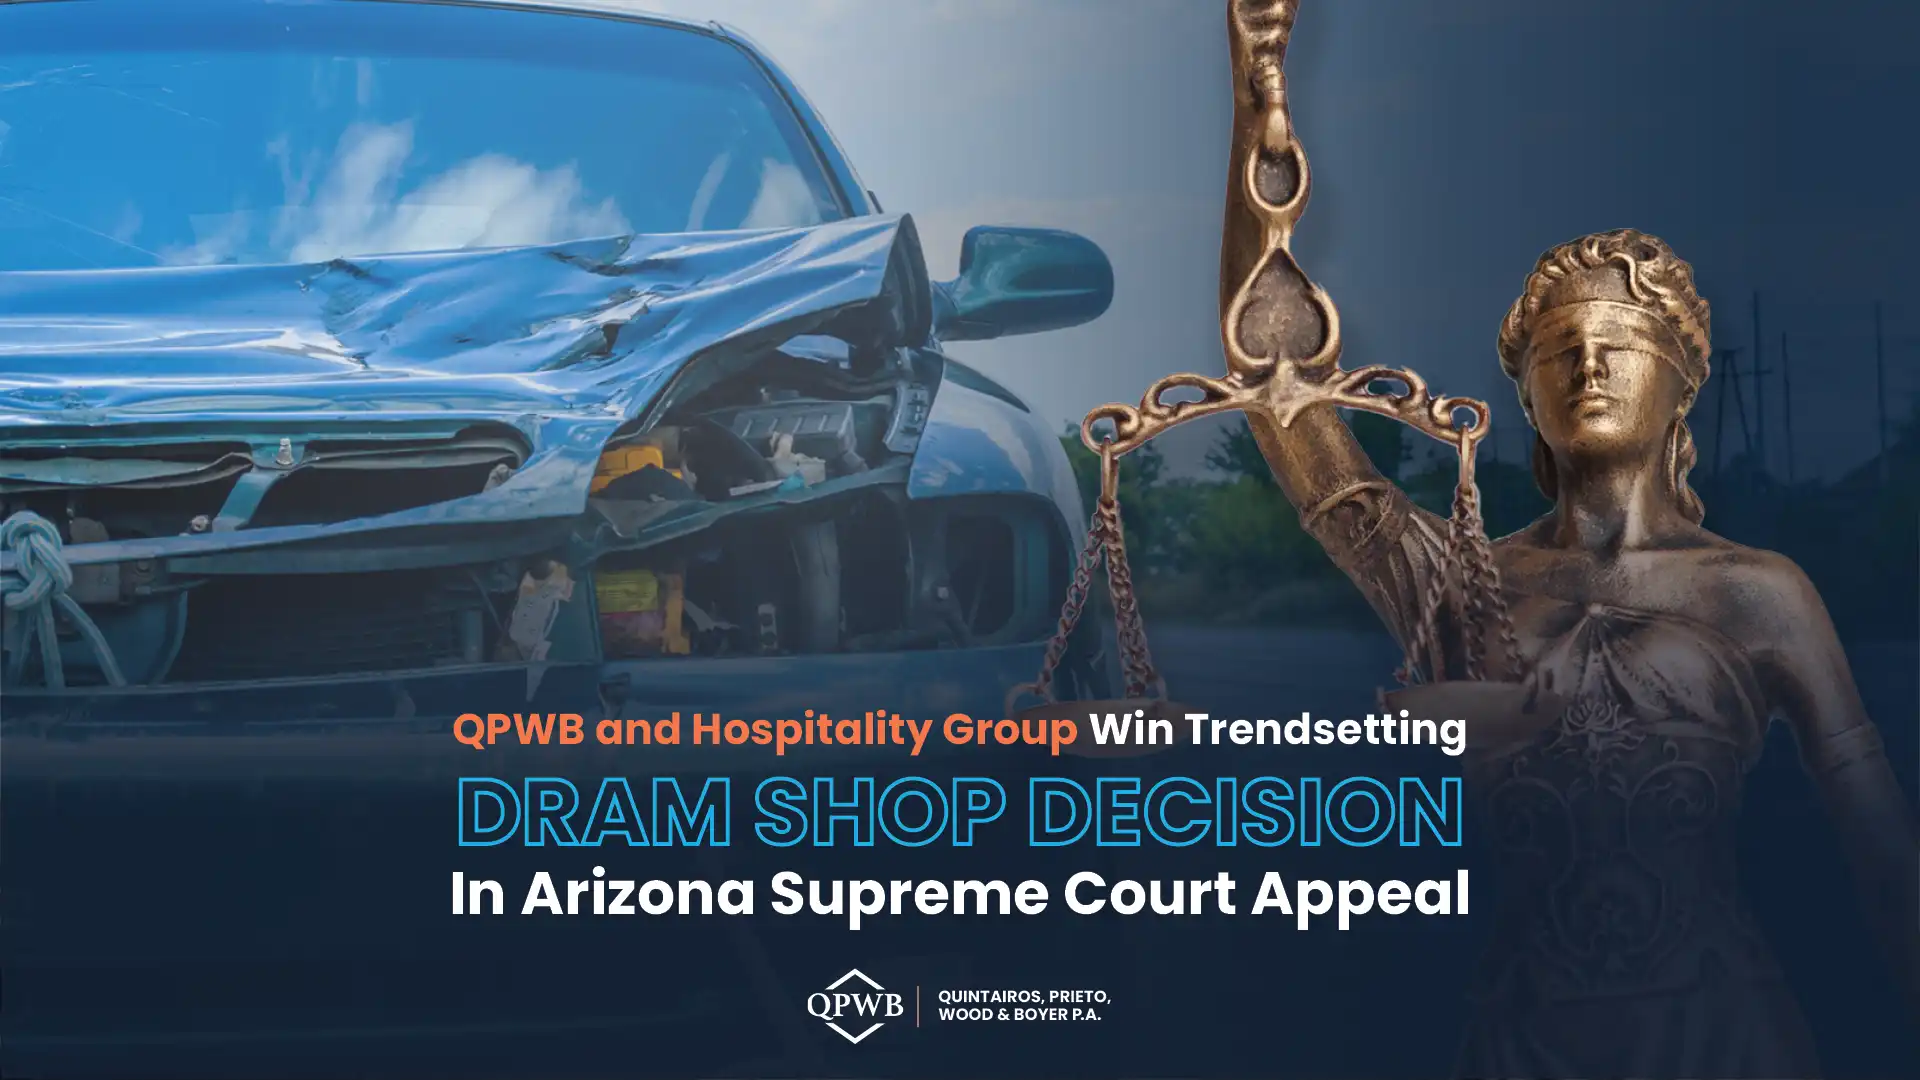 QPWB and Hospitality Group Win Trendsetting Dram Shop Decision In Arizona Supreme Court Appeal